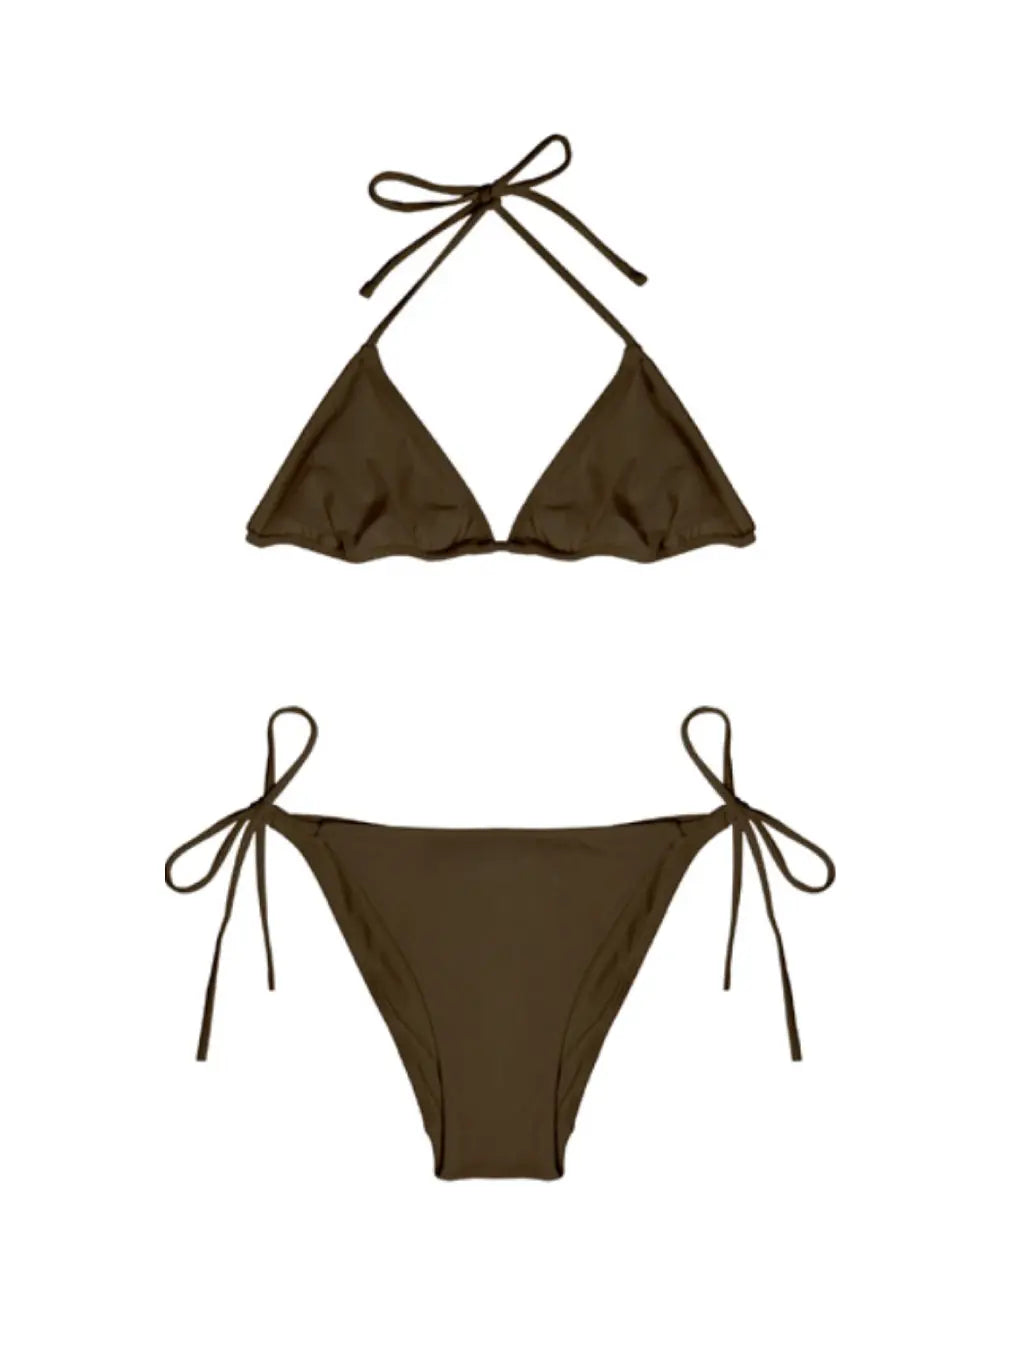 A pair of Venti Olive Bikini Bottoms with adjustable side ties, available at Lido, is displayed against a white background. The design is simple yet chic, featuring moderate coverage at the front and back, with long strings for securing on both sides—ideal for lounging in Barcelona.